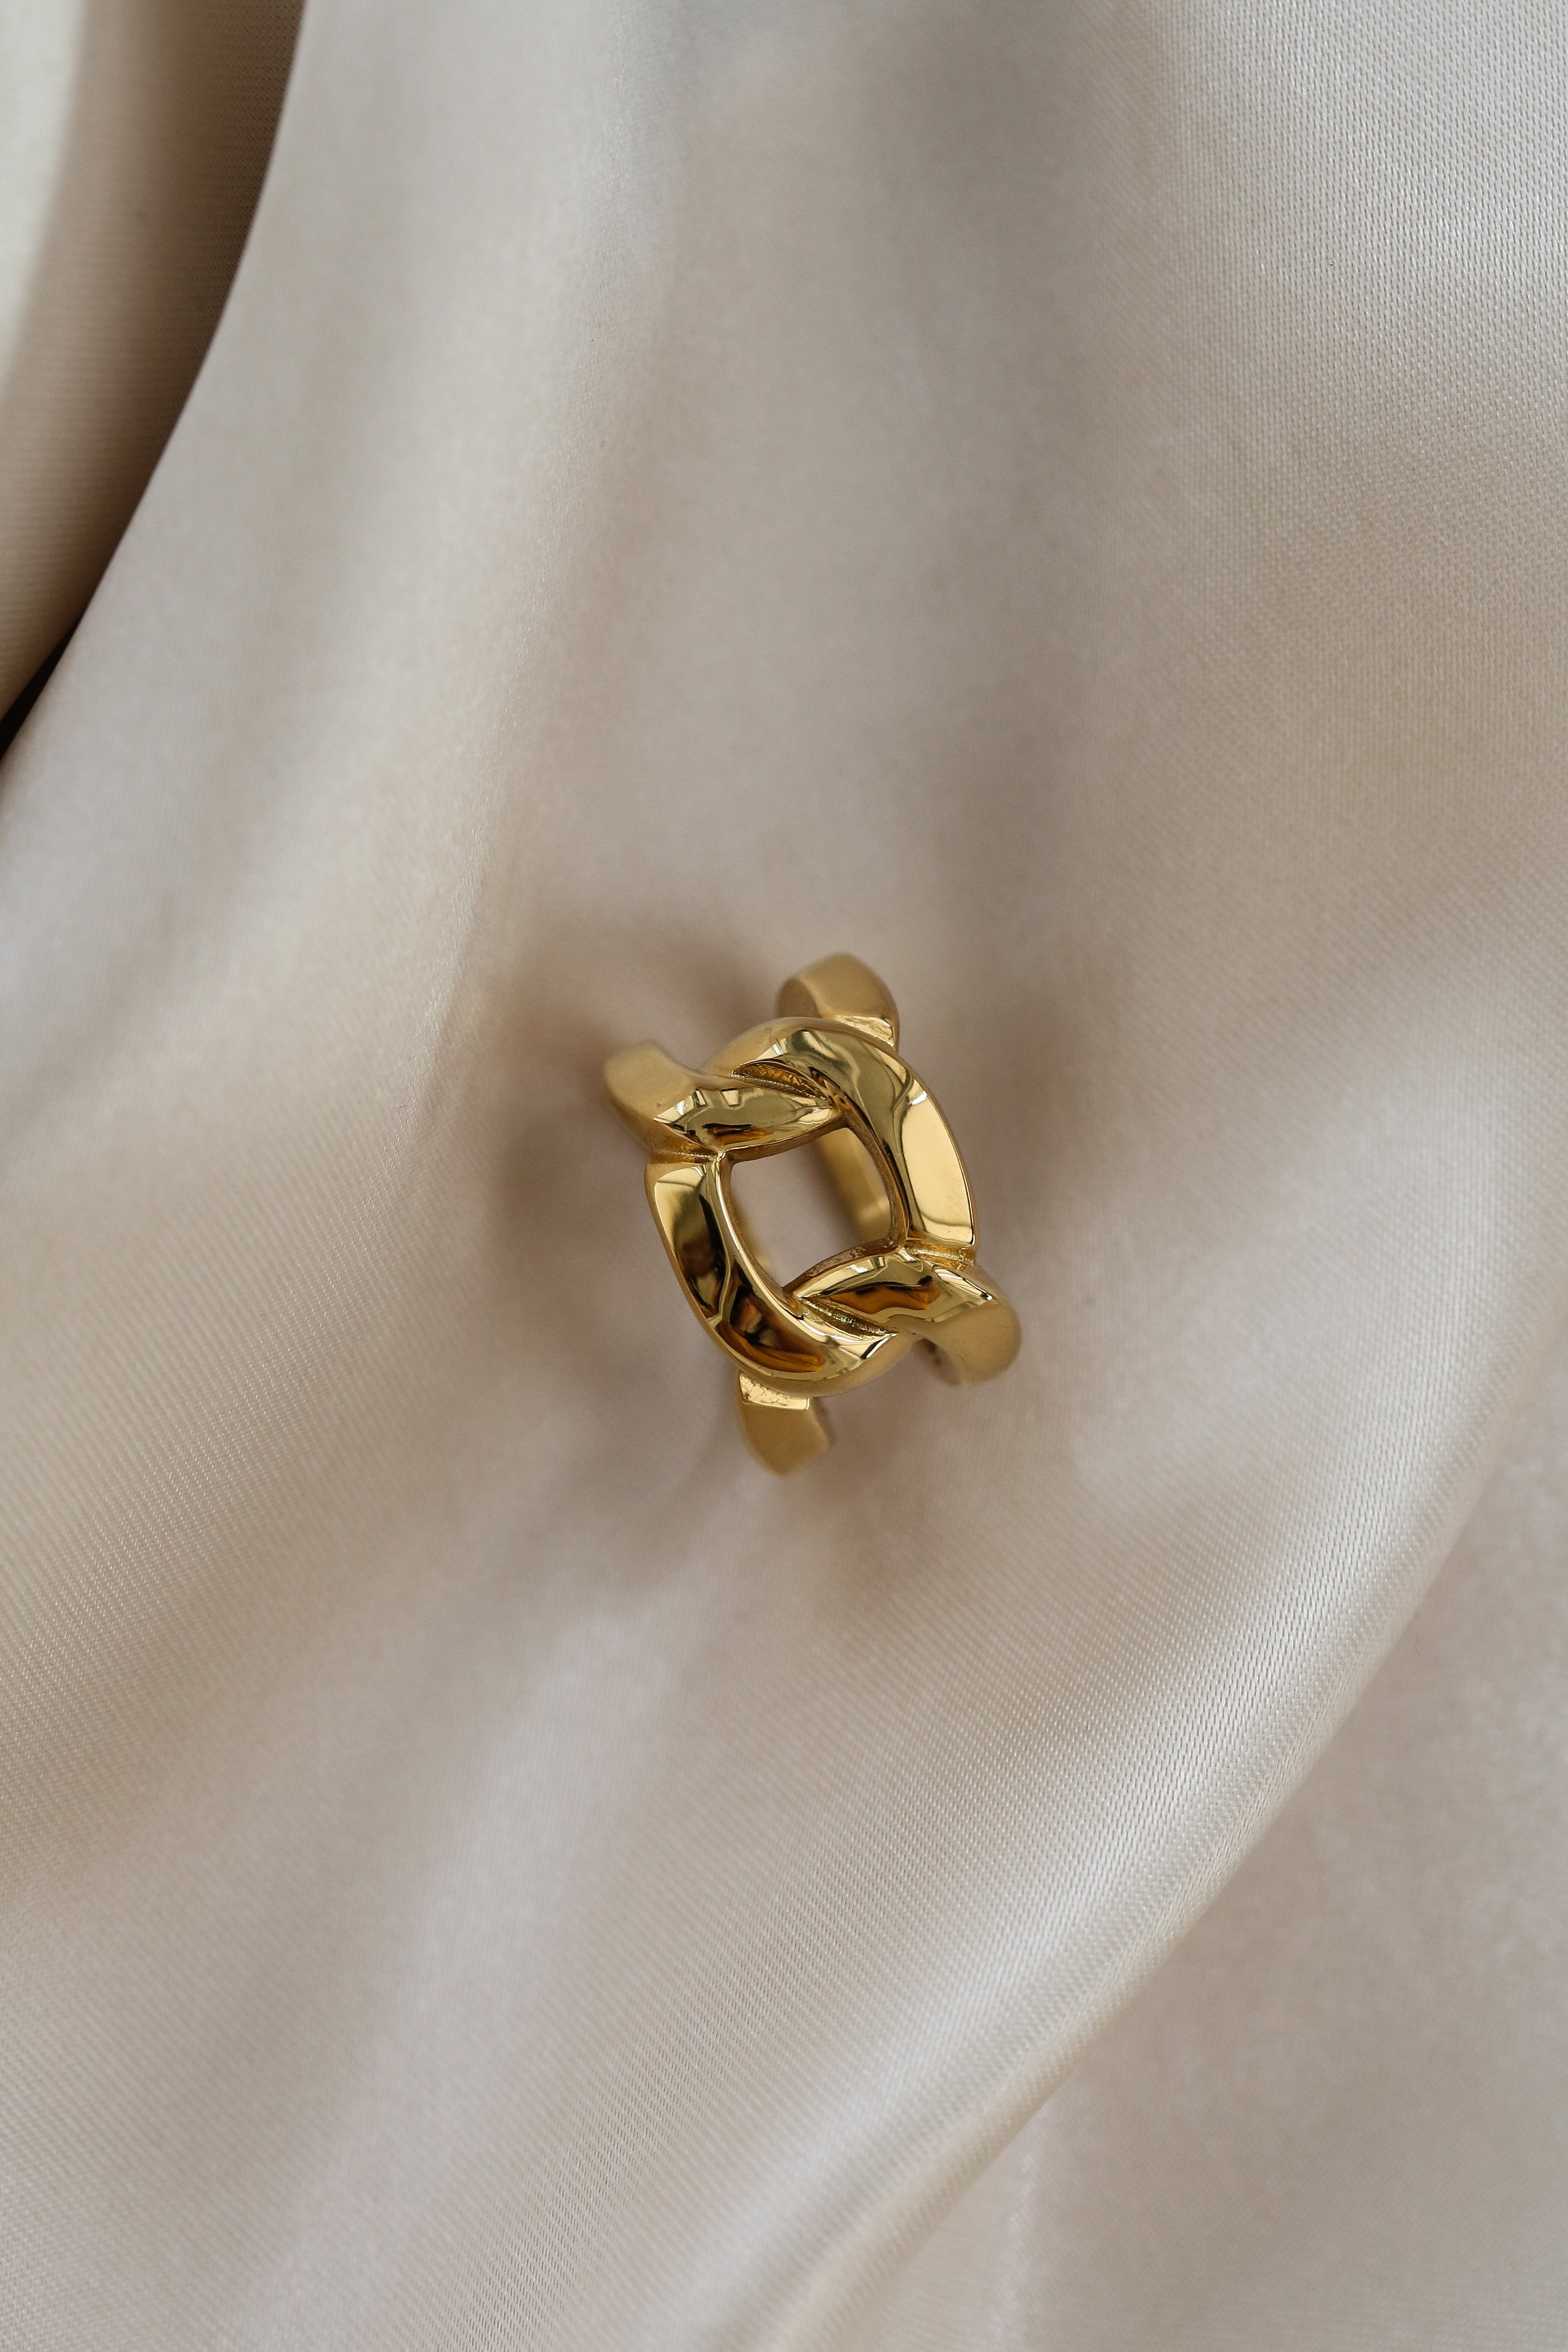 Elina Ring - Boutique Minimaliste has waterproof, durable, elegant and vintage inspired jewelry